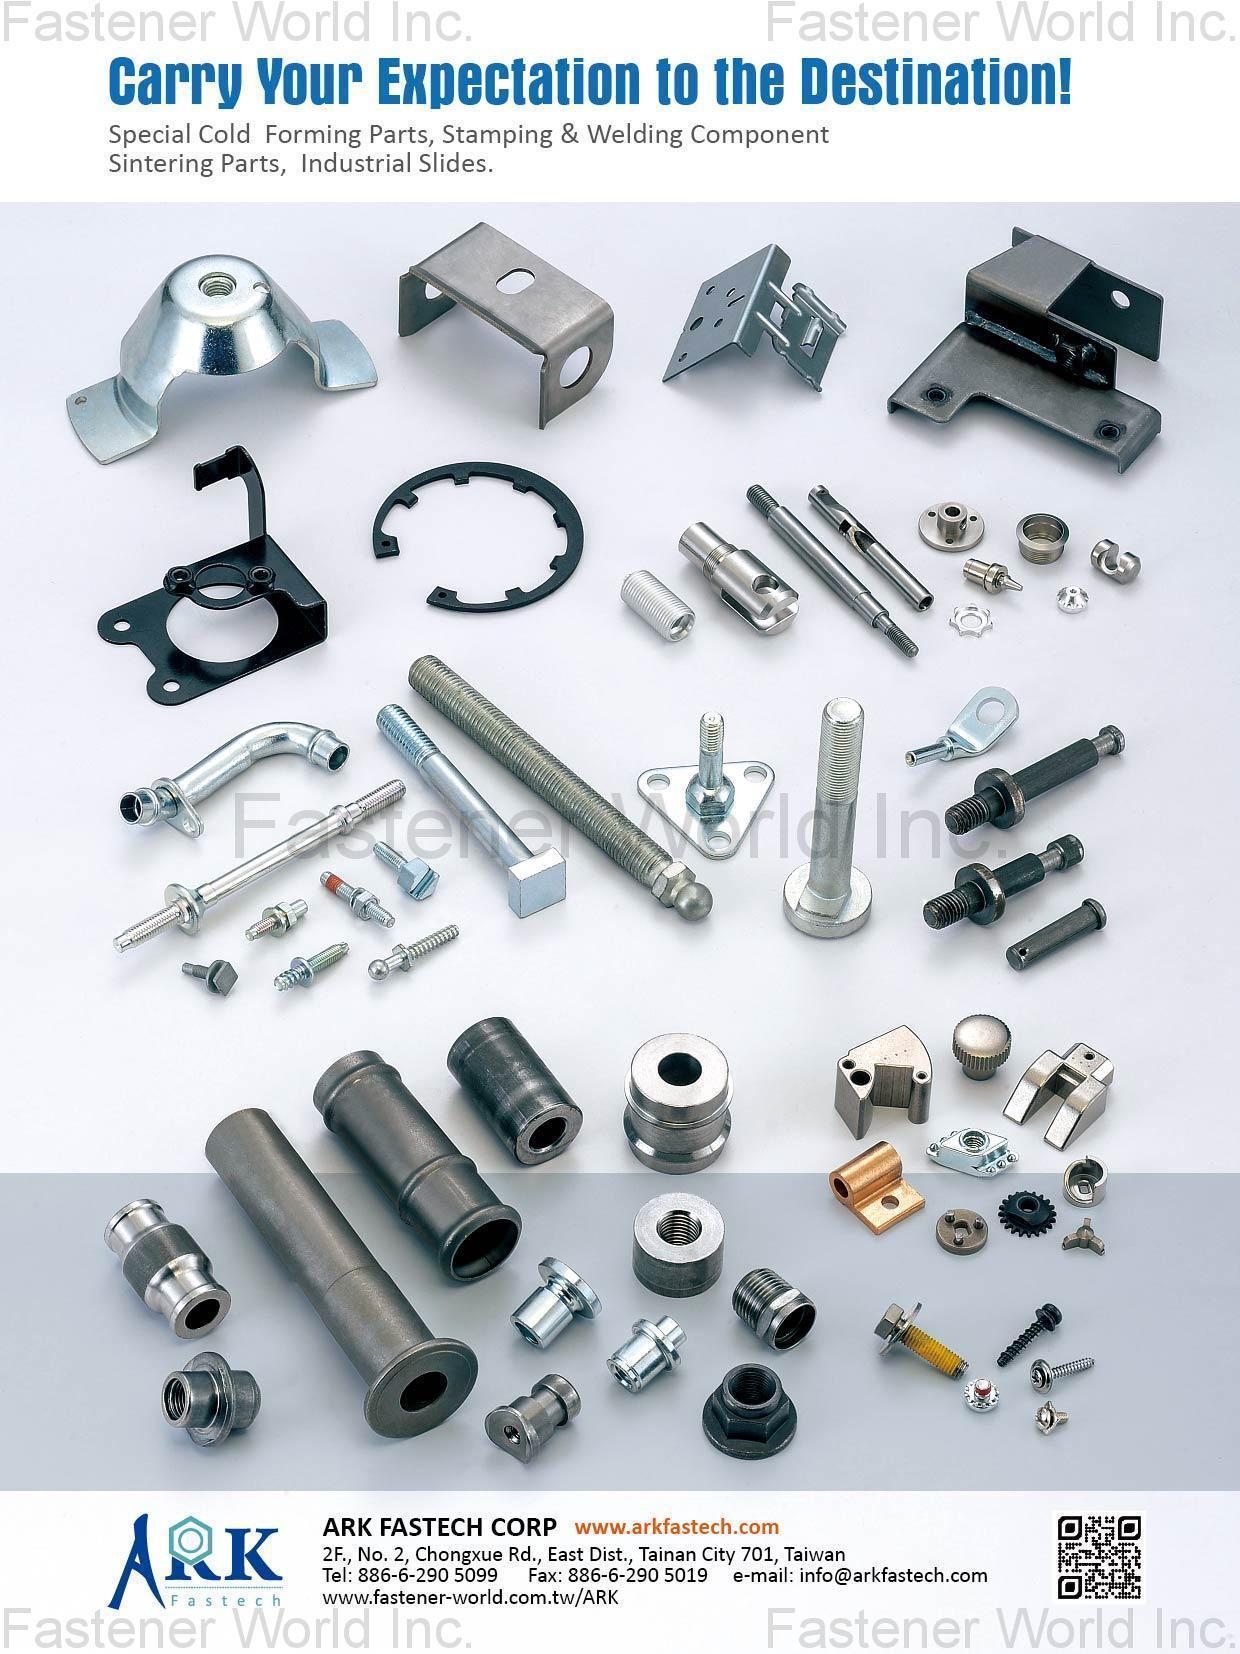 ARK FASTECH CORP , Special Cold Forming Parts, Stamping & Welding Component, Sintering Parts, Industrial Slides , Special Cold / Hot Forming Parts